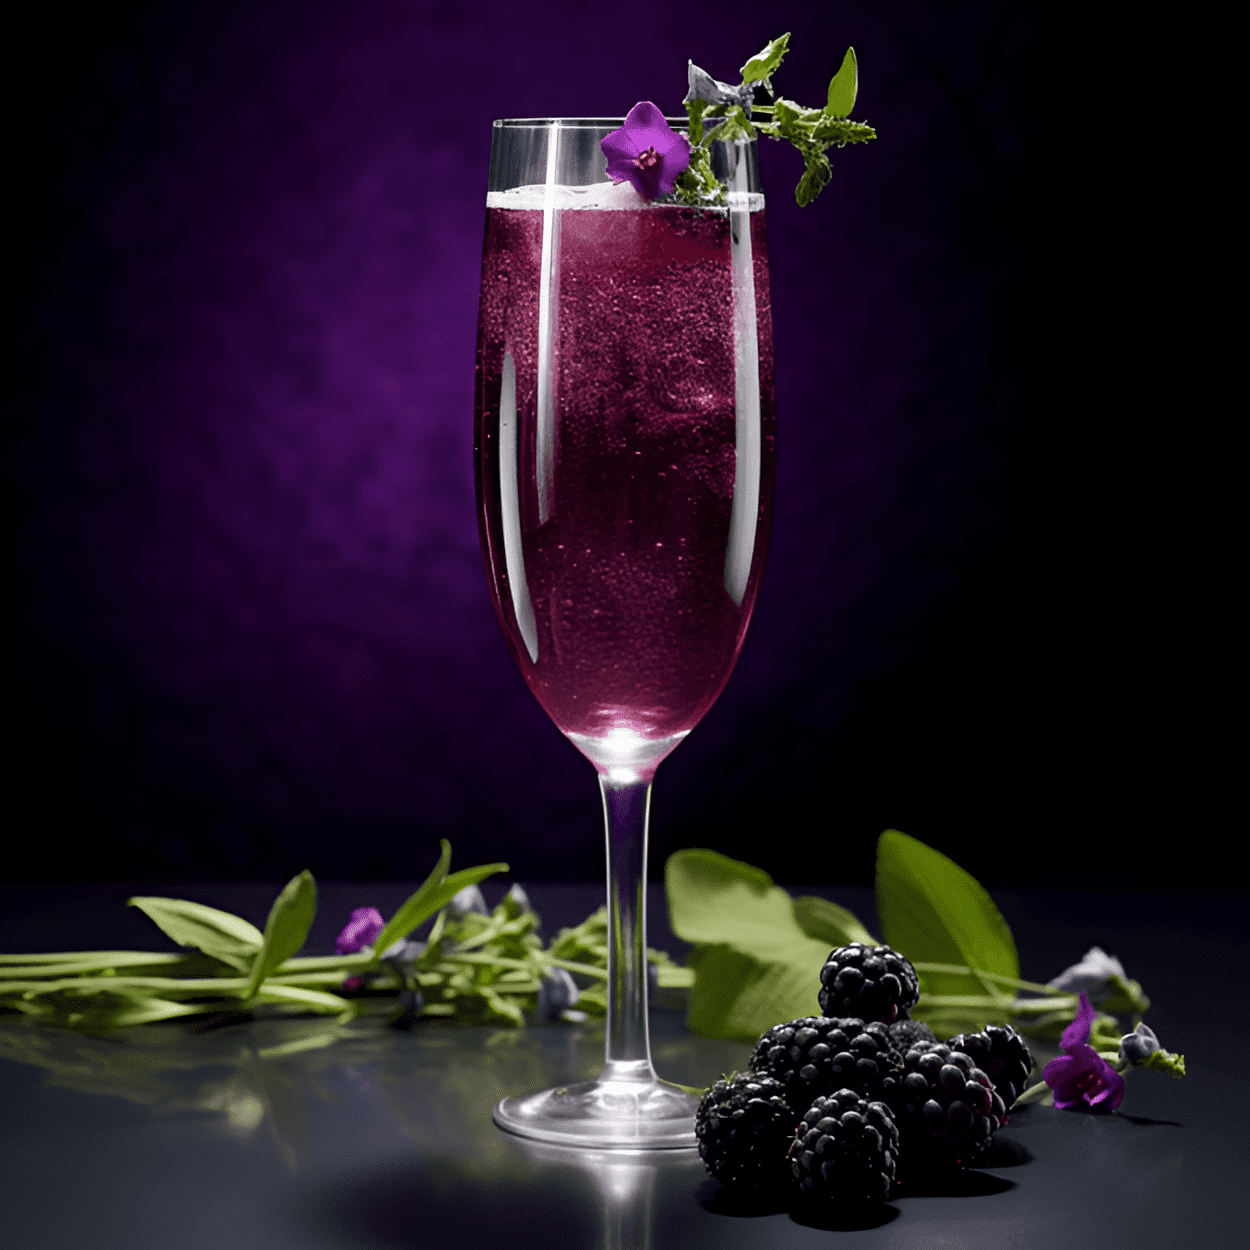 Blackberry-Thyme French 75 Cocktail Recipe - The Blackberry-Thyme French 75 is a delightfully balanced cocktail. The sweet, tart flavor of blackberries is complemented by the earthy, aromatic thyme. The gin adds a juniper-forward botanical flavor, and the champagne gives it a bubbly, crisp finish.